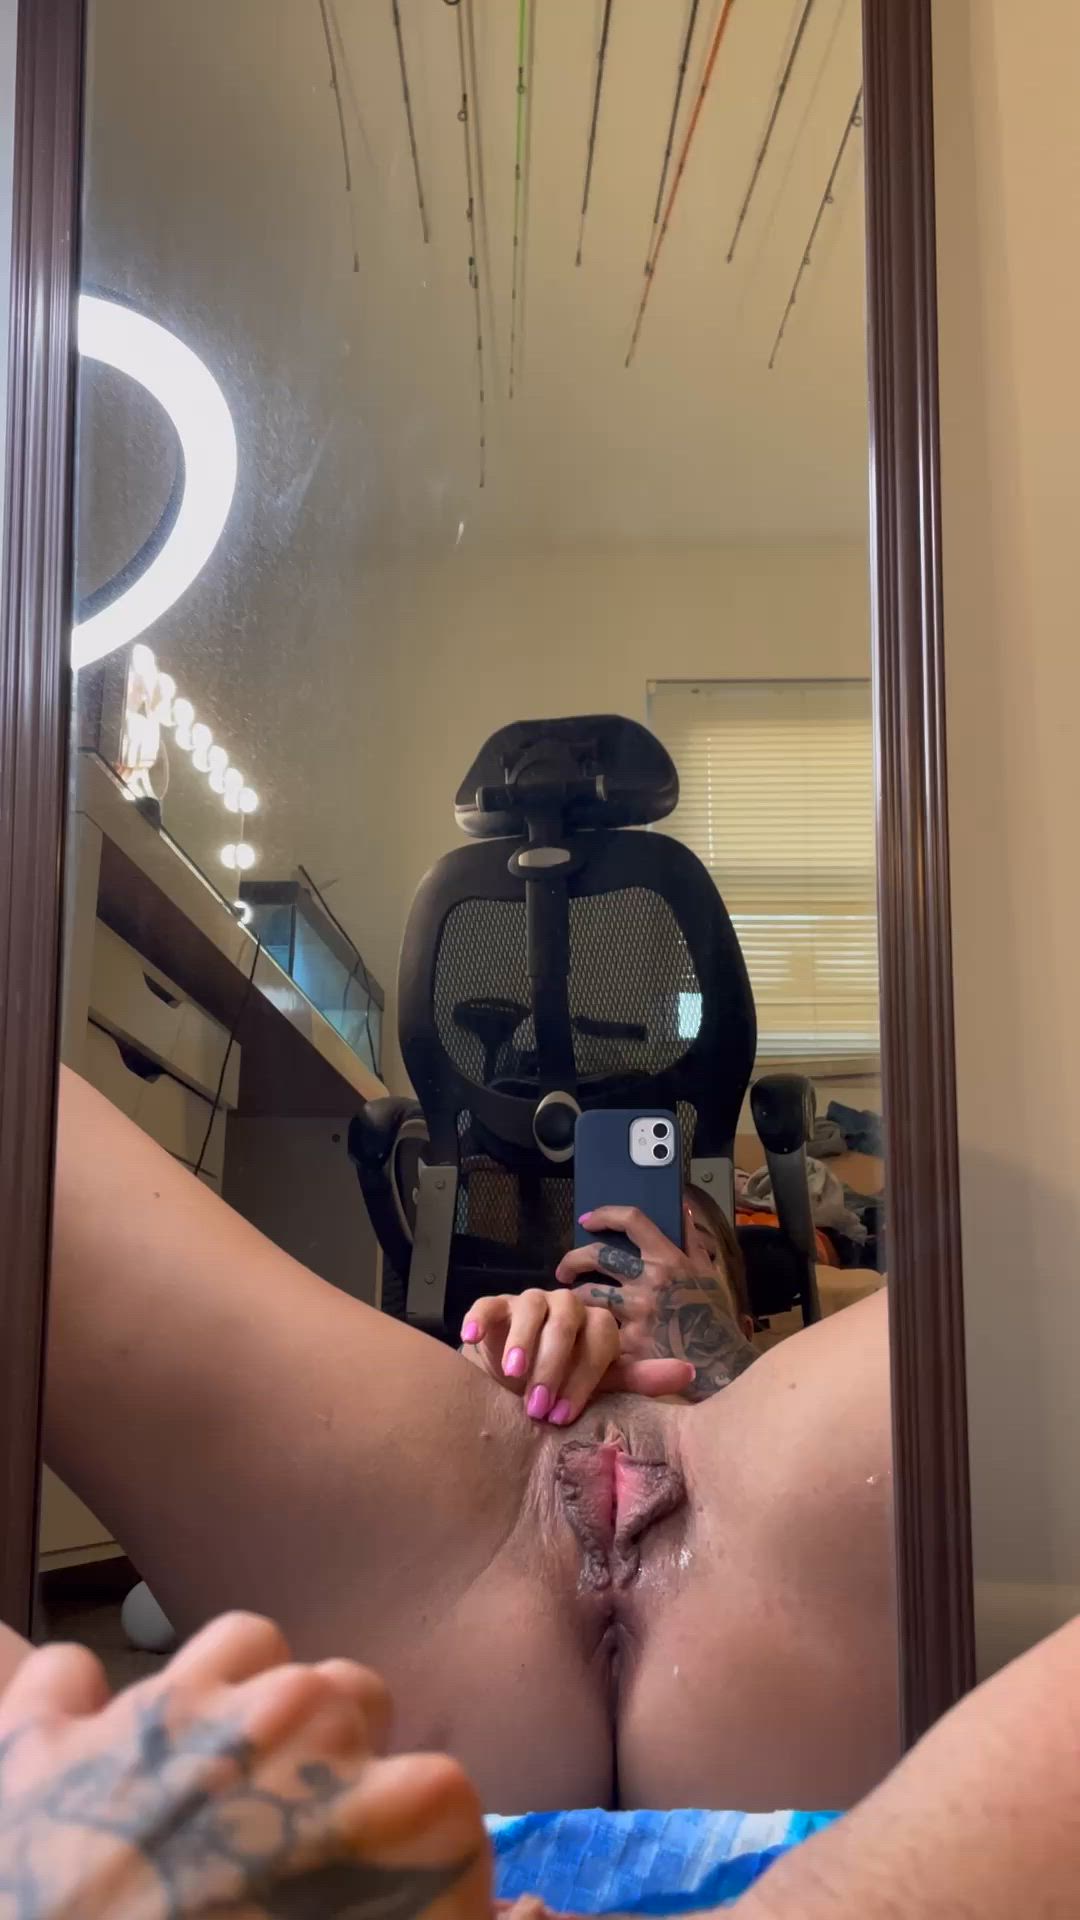 Piss porn video with onlyfans model suchagg <strong>@sucha_goodgirlx</strong>